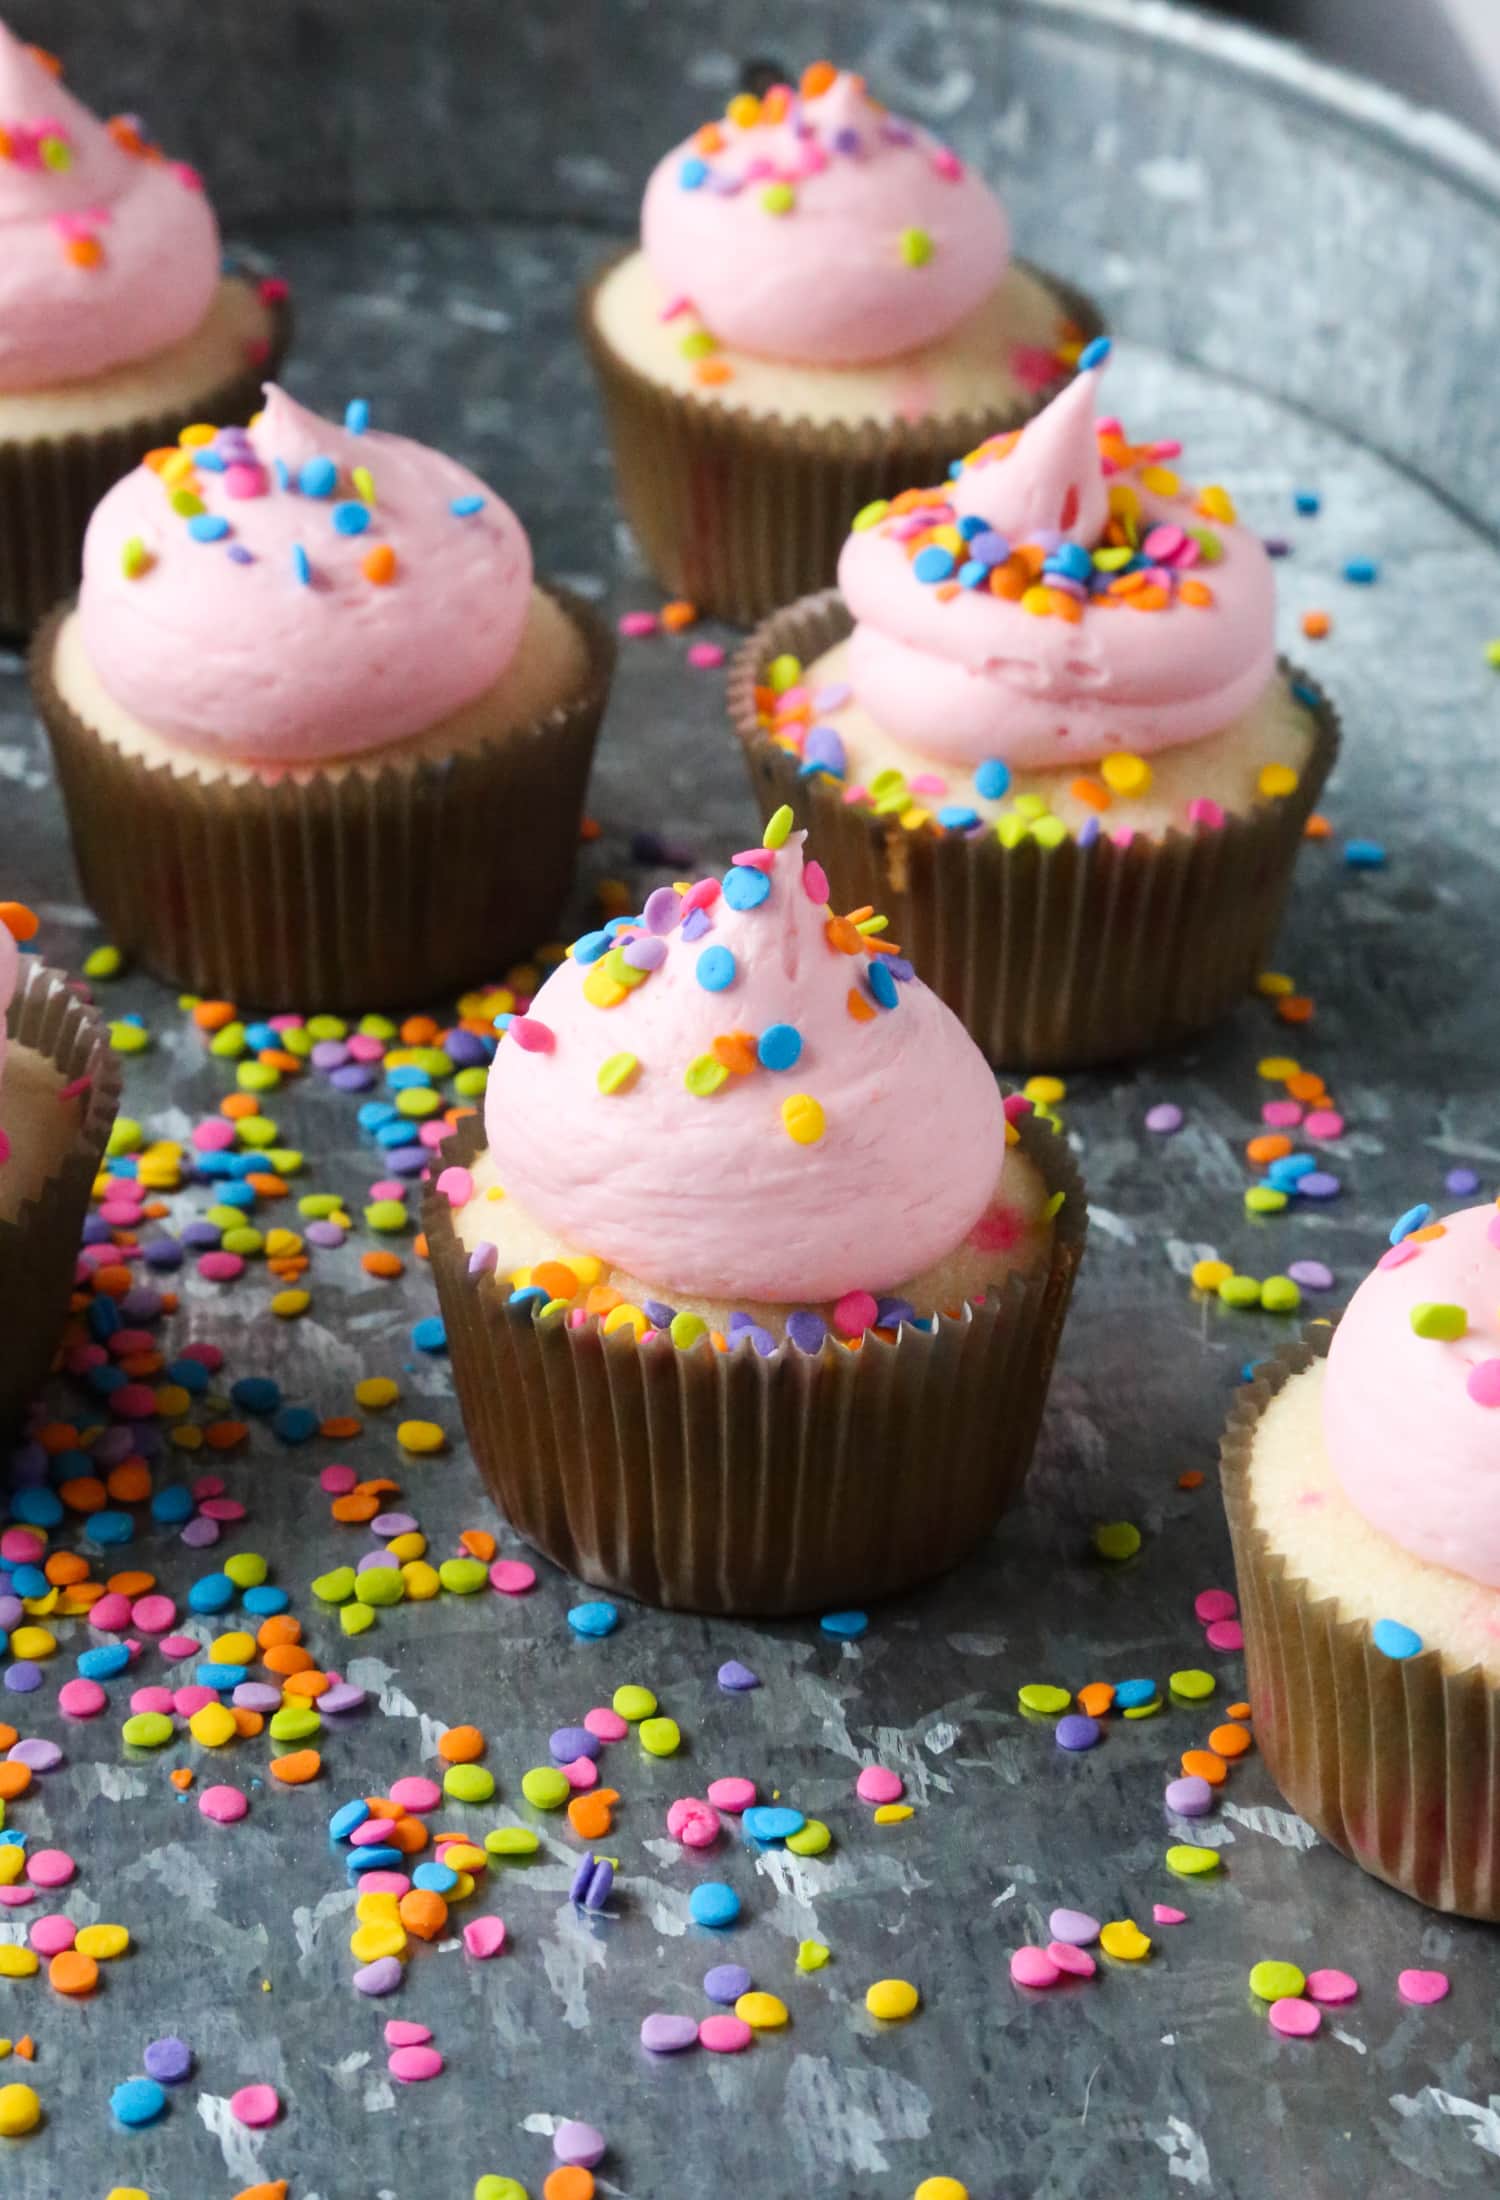 Confetti cupcakes with pink frosting and sprinkles on top in a sprinkle covered tray